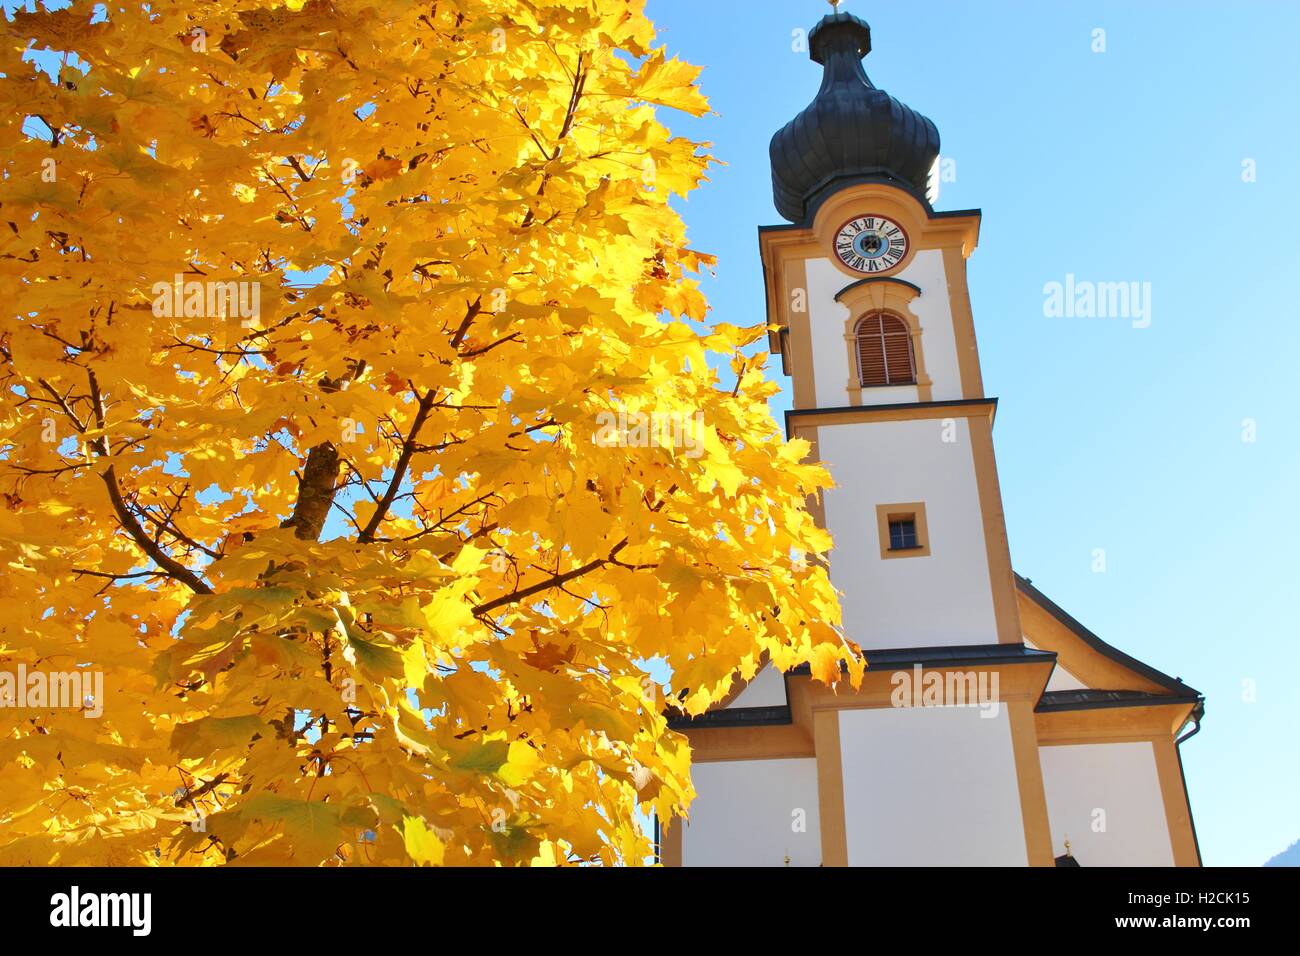 Autumn in Austria: Tree with very yellow autumn leafs and the baroque parish church or Pfarrkirche of Mittersill, Salzburg Land. Stock Photo